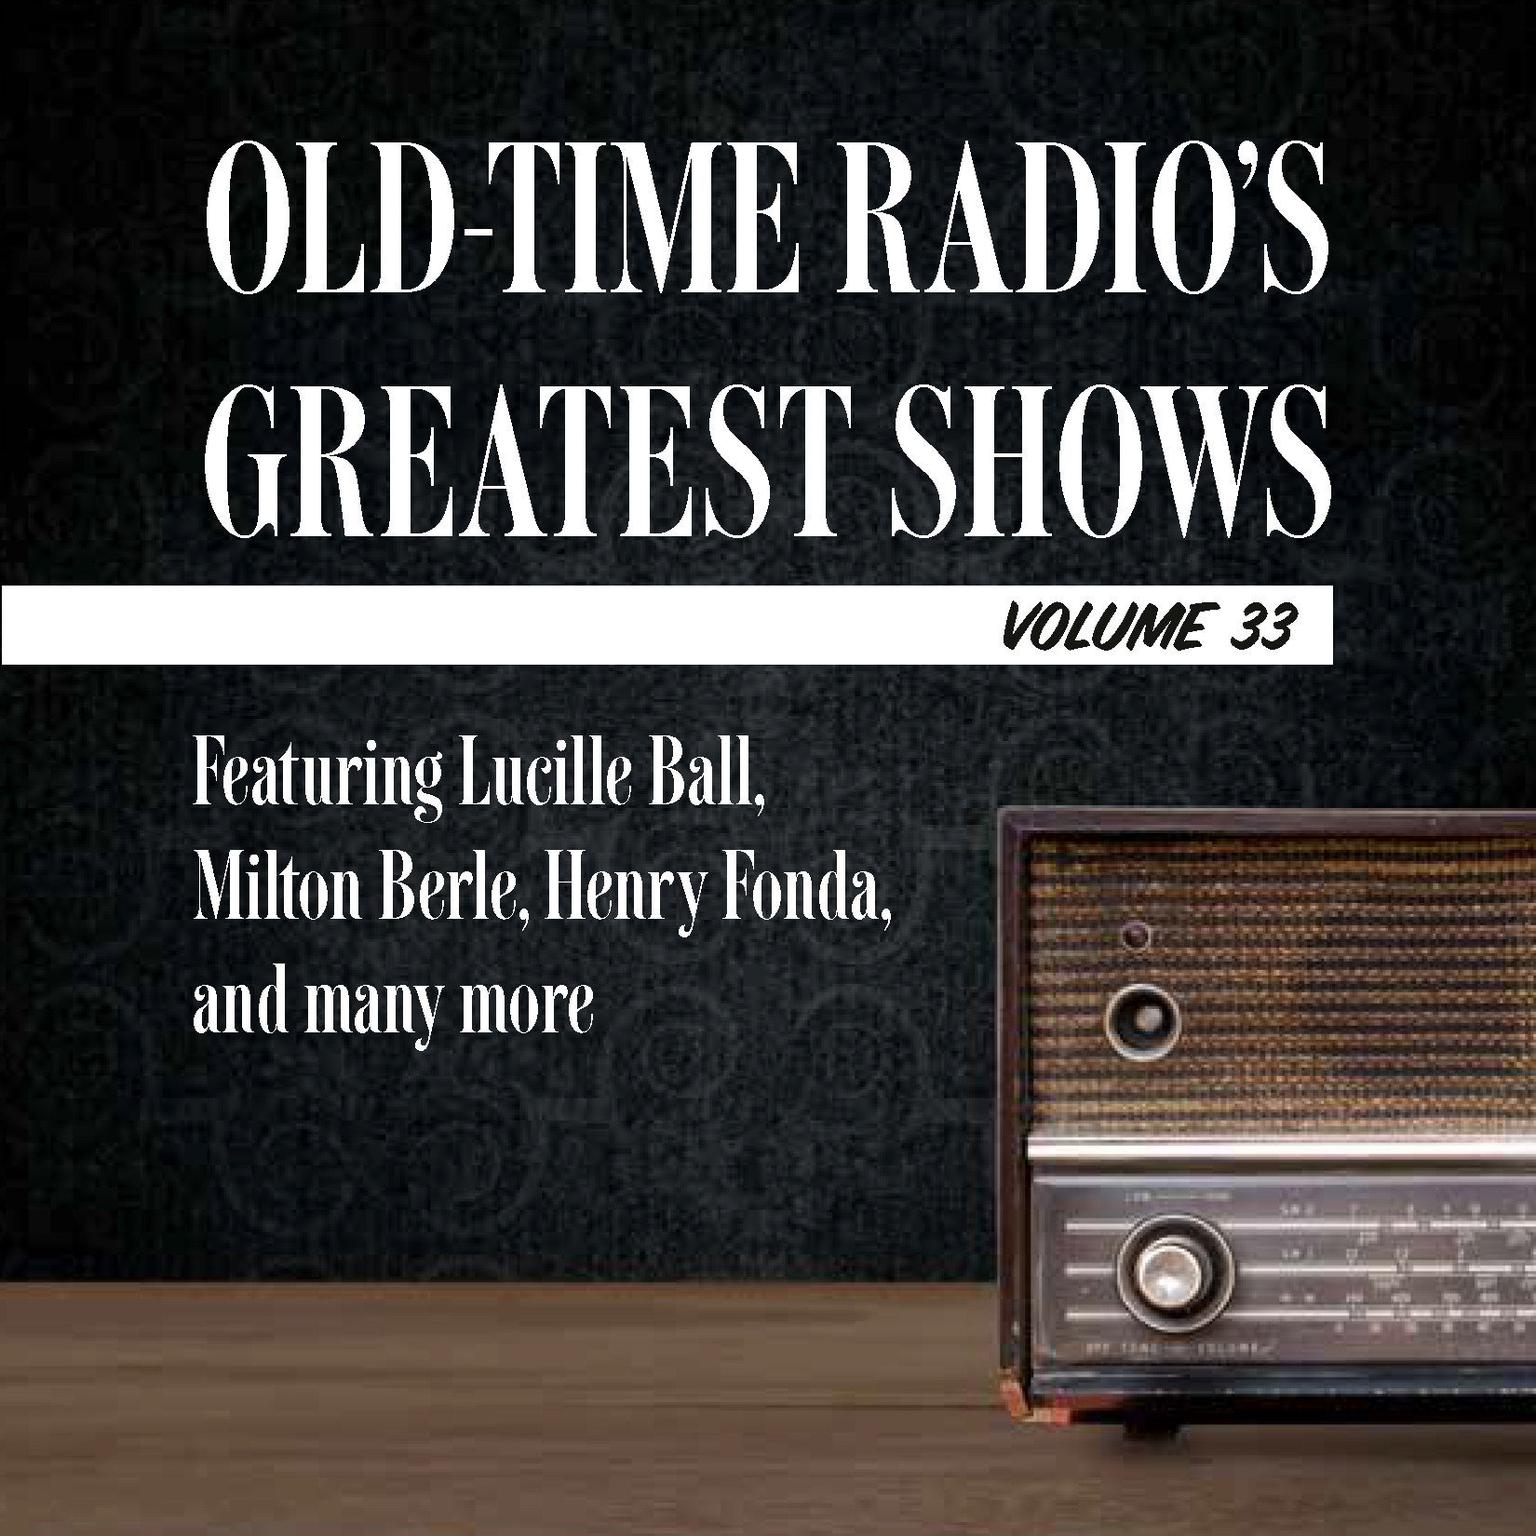 Old-Time Radios Greatest Shows, Volume 33: Featuring Lucille Ball, Milton Berle, Henry Fonda, and many more Audiobook, by Author Info Added Soon